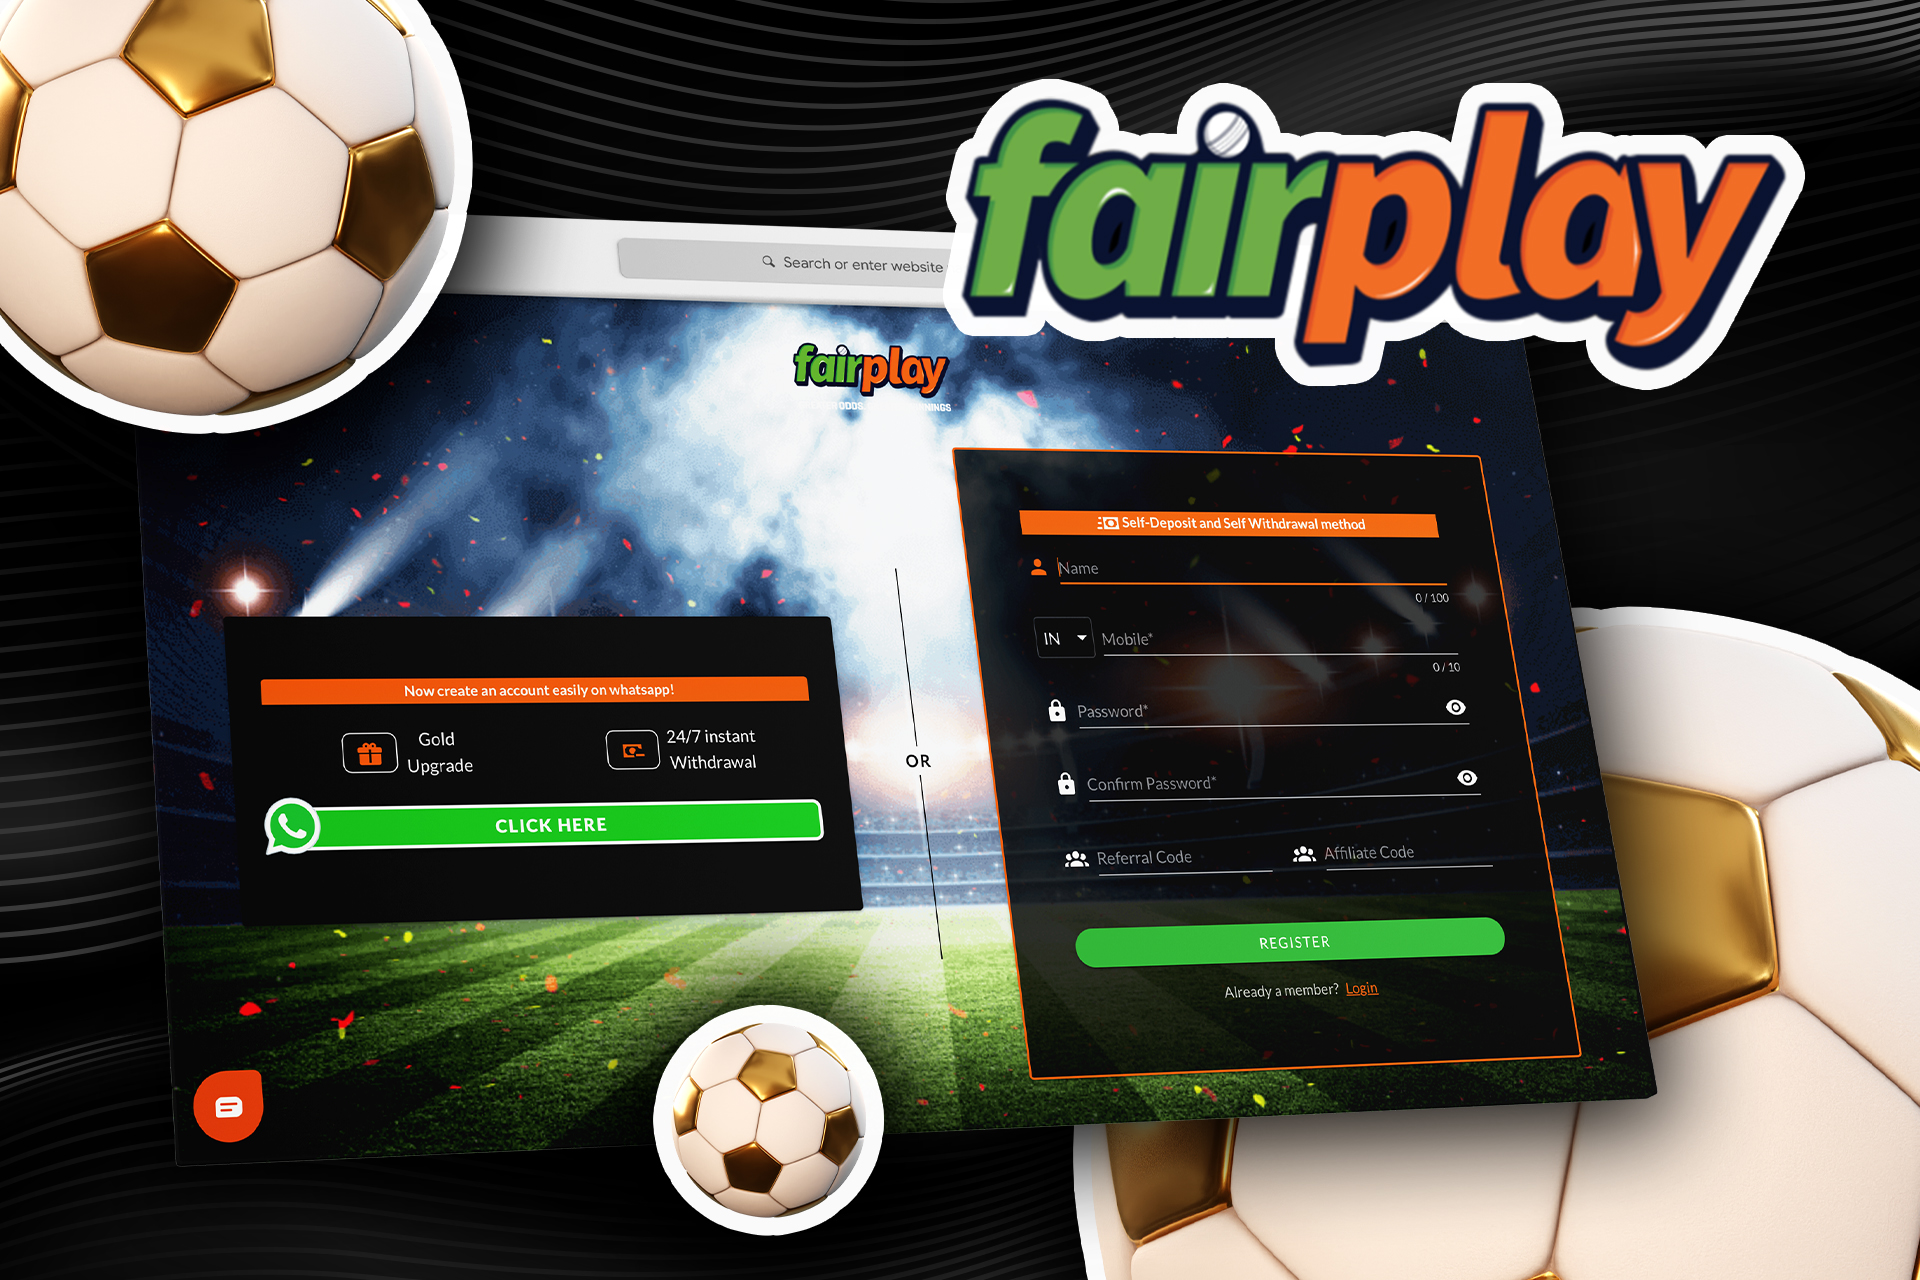 Register your account on Fairplay.